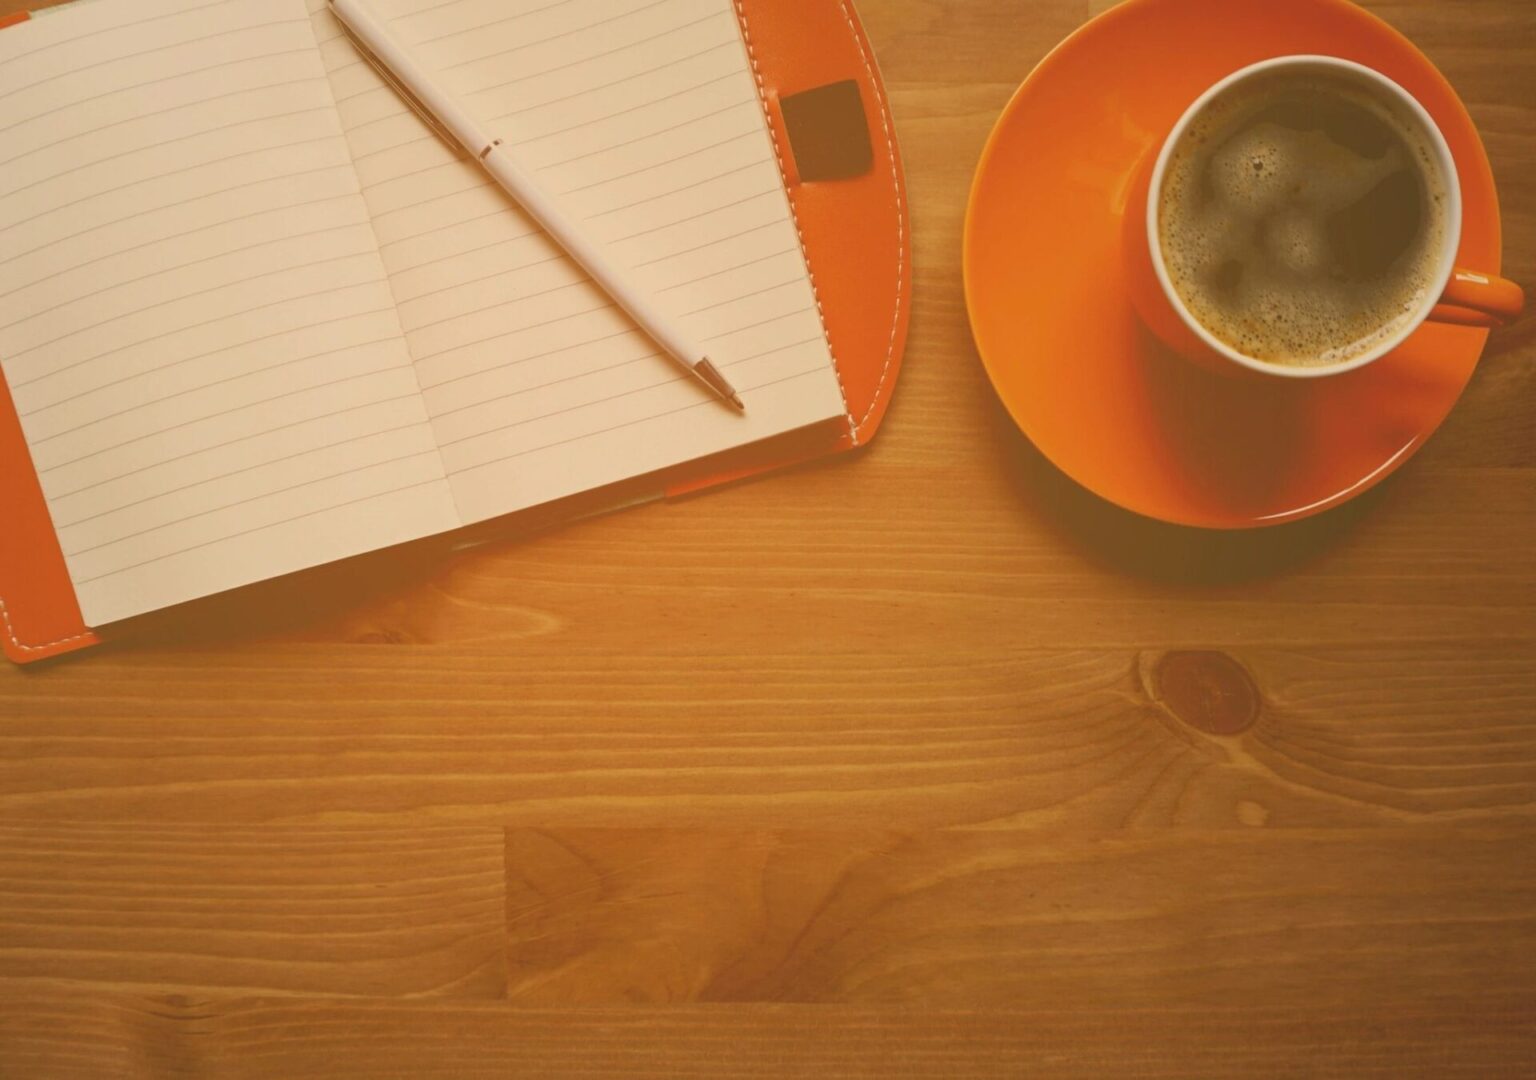 A cup of coffee and an open notebook on the table.